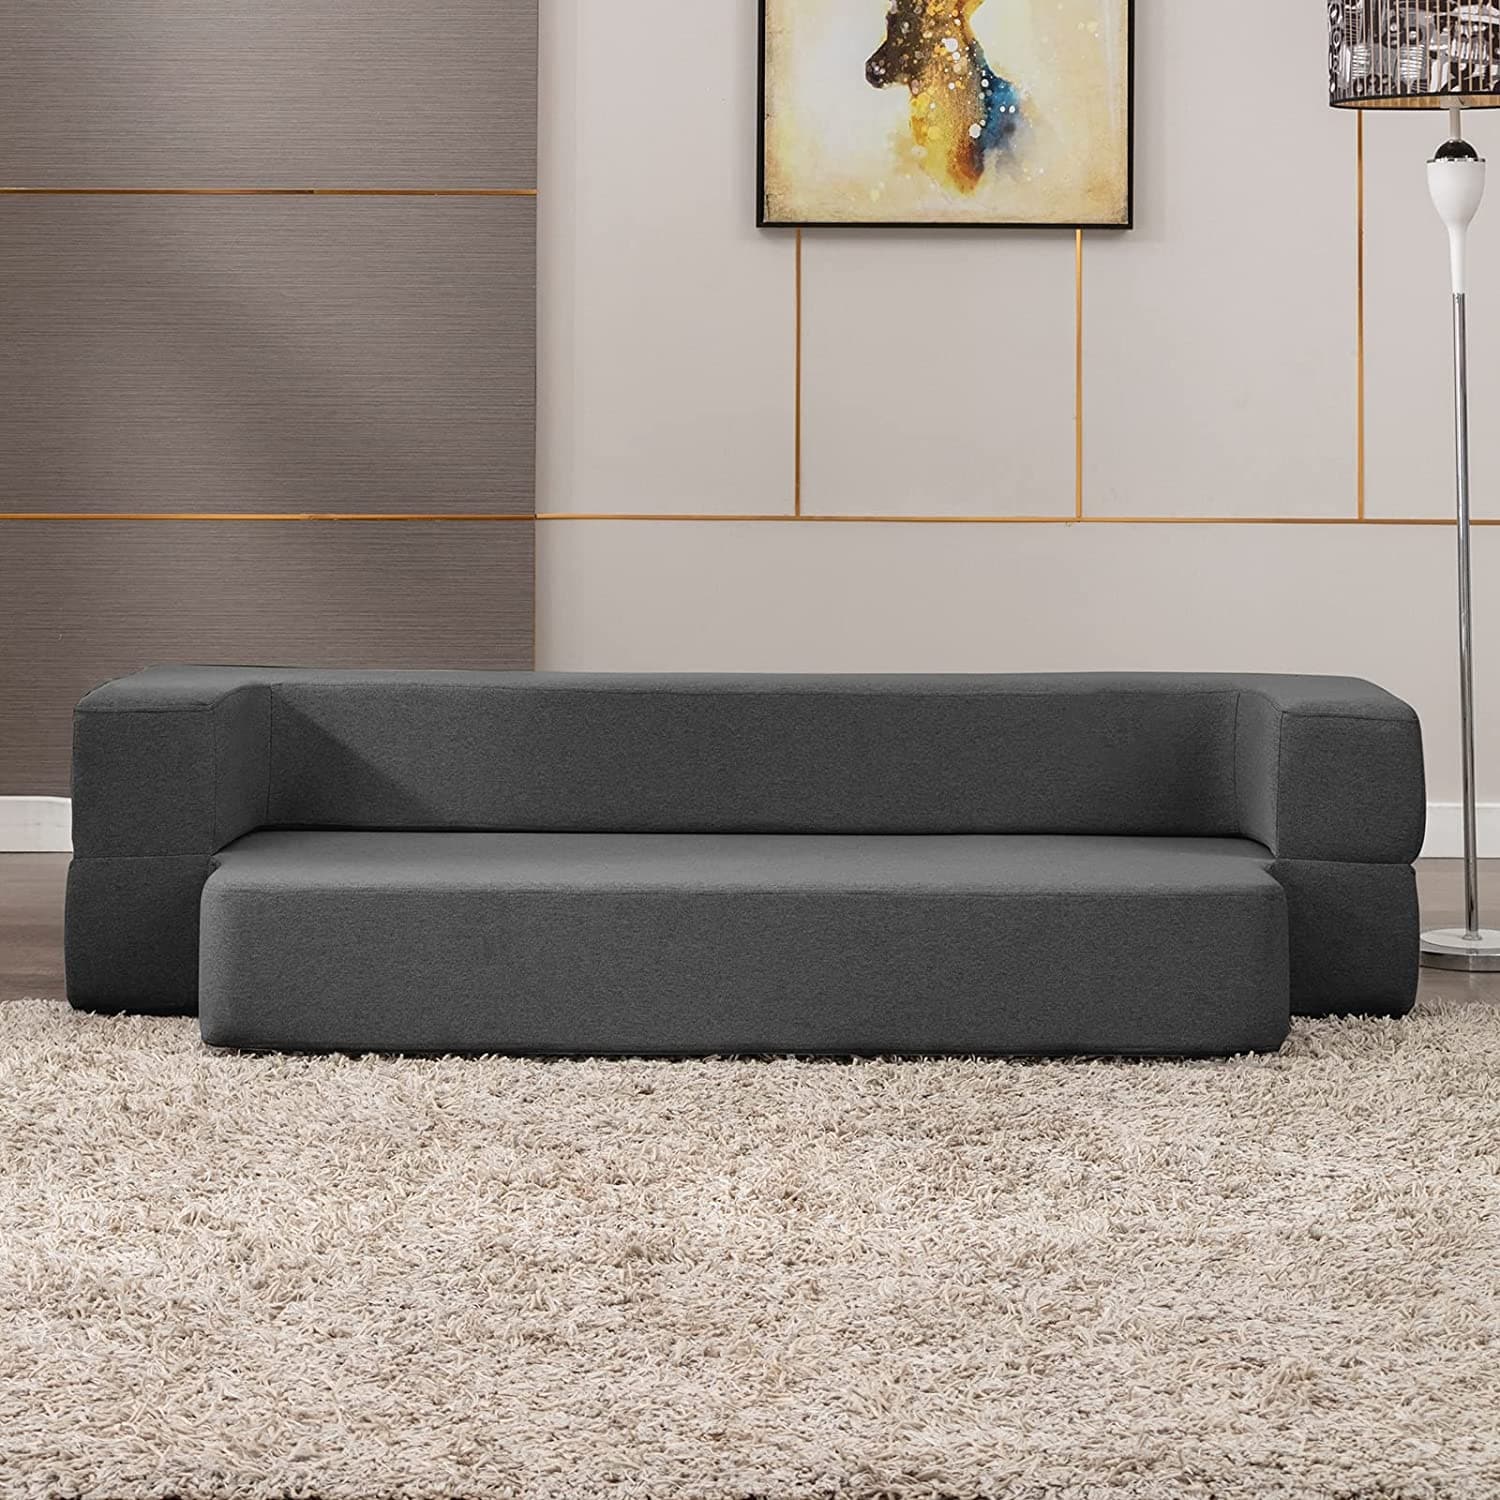 Convertible Memory Foam Futon Sofa Bed with Adjustable Armrest-Black | Costway